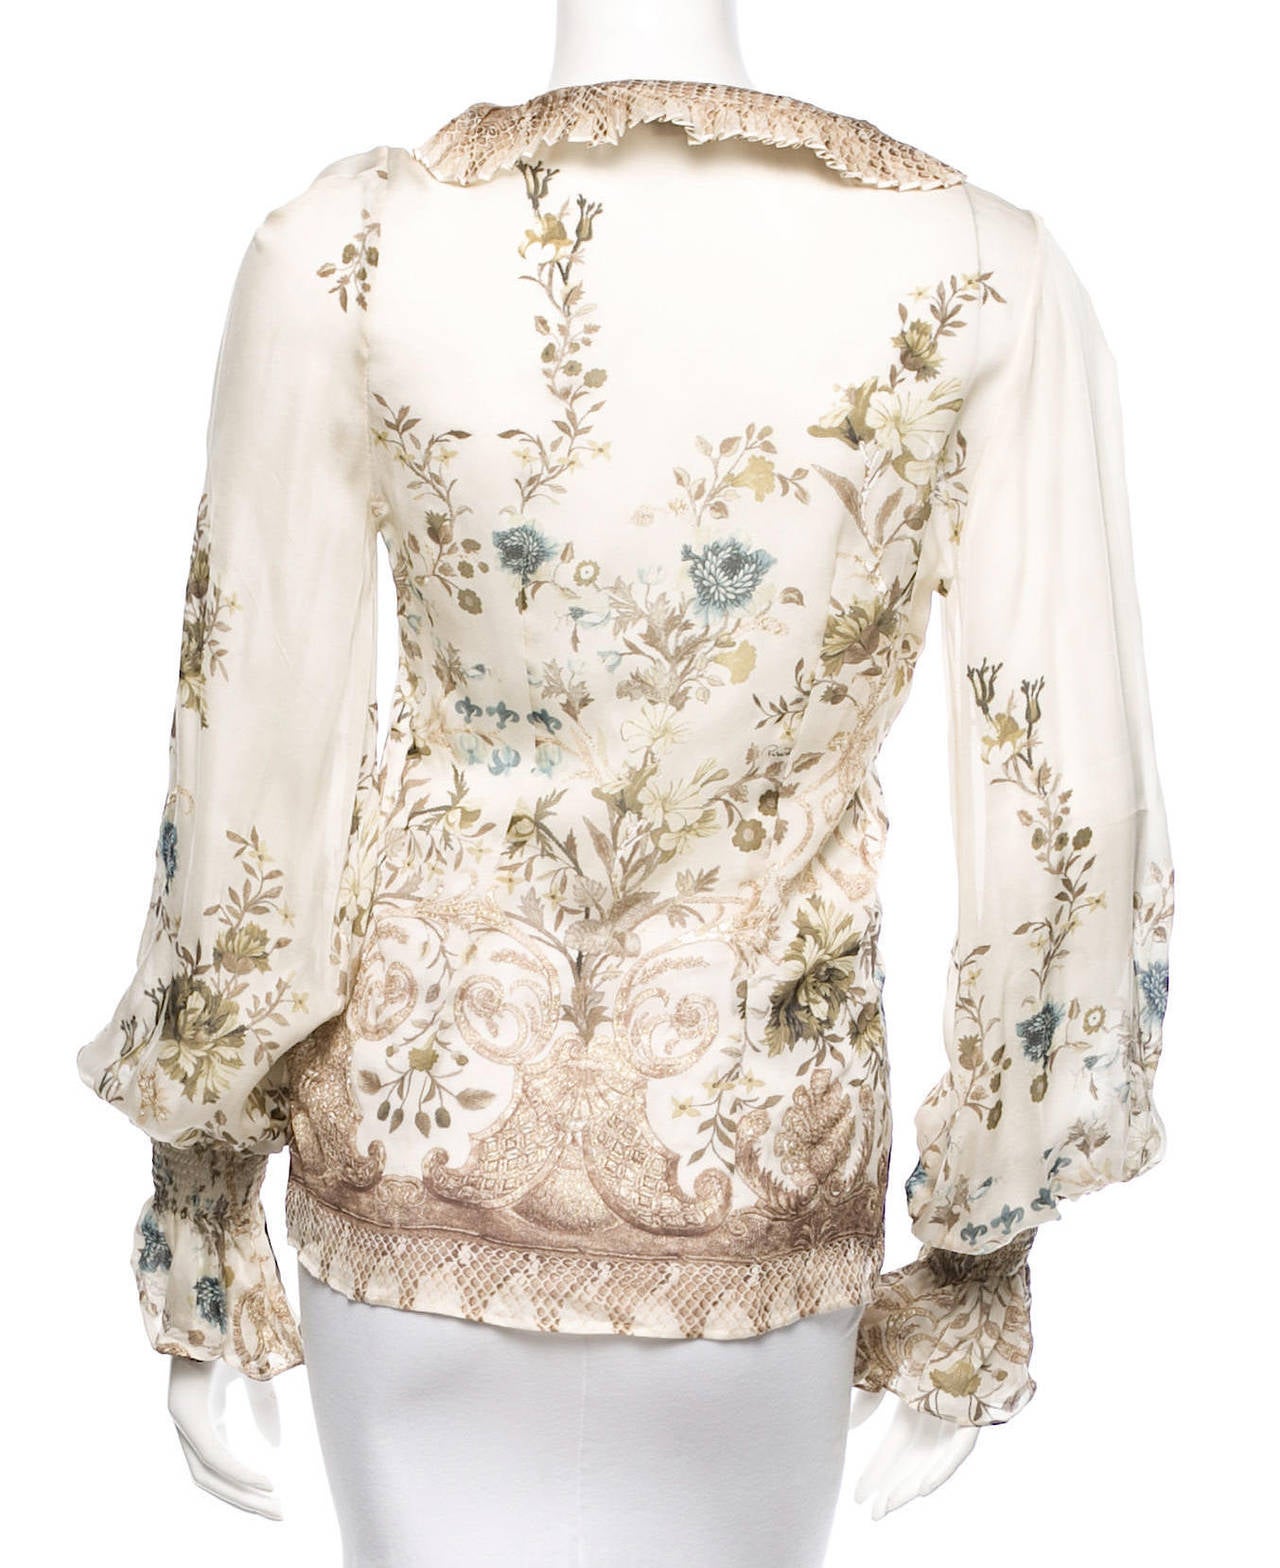 Roberto Cavalli Silk Blouse In Excellent Condition For Sale In Bethesda, MD